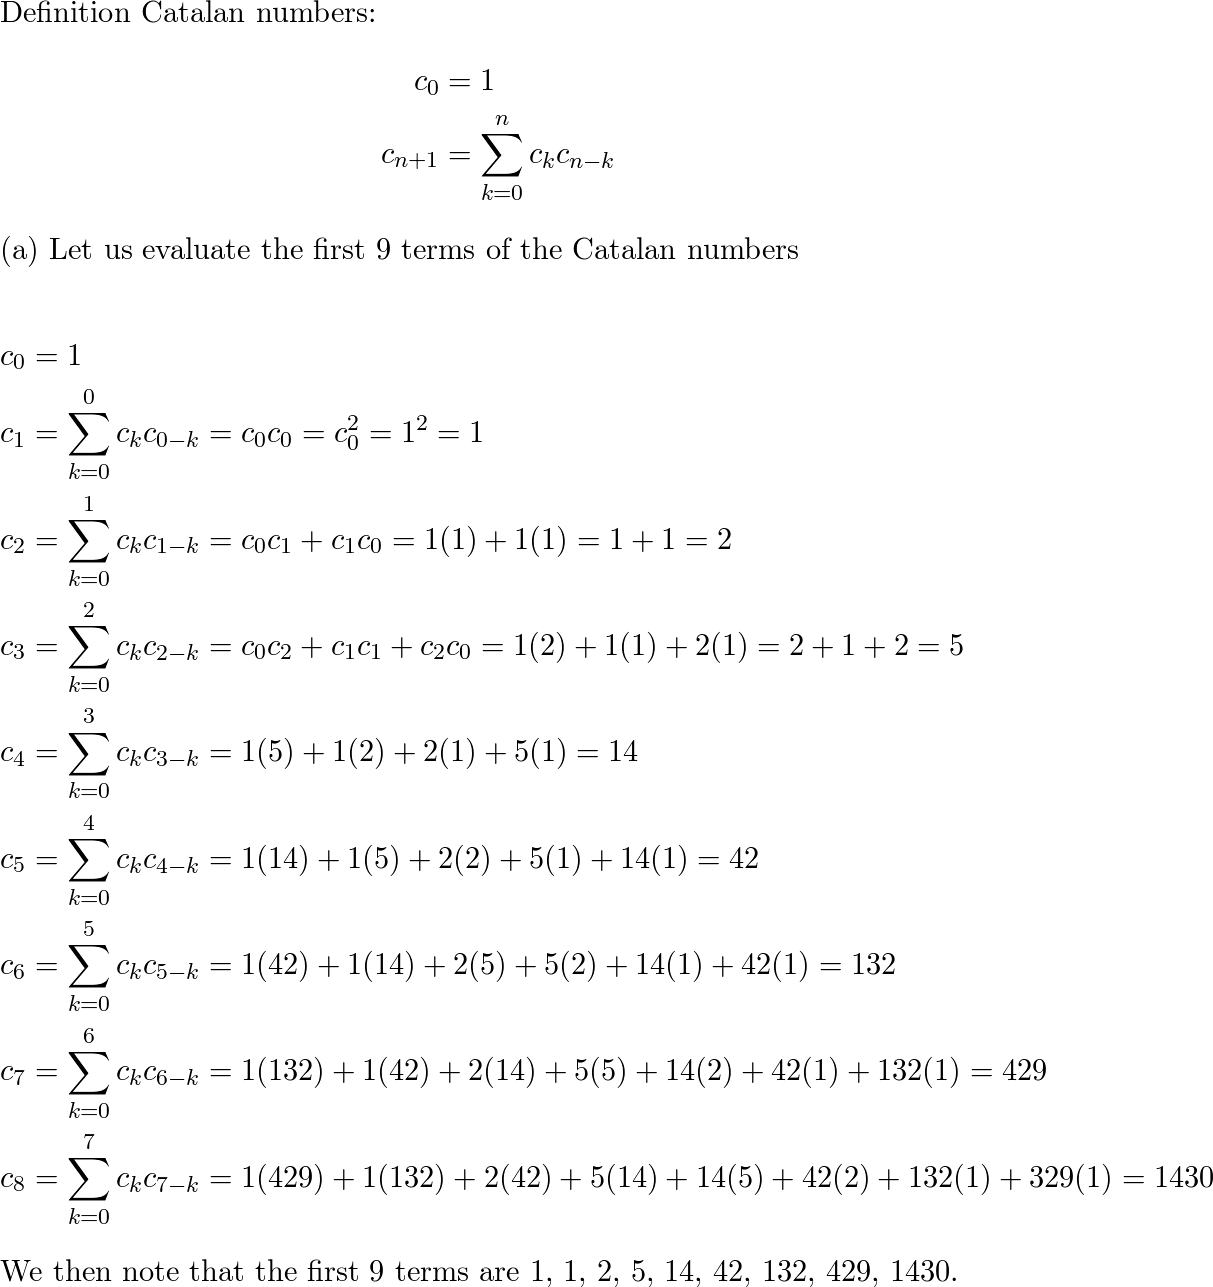 The value of the first 30 Catalan numbers